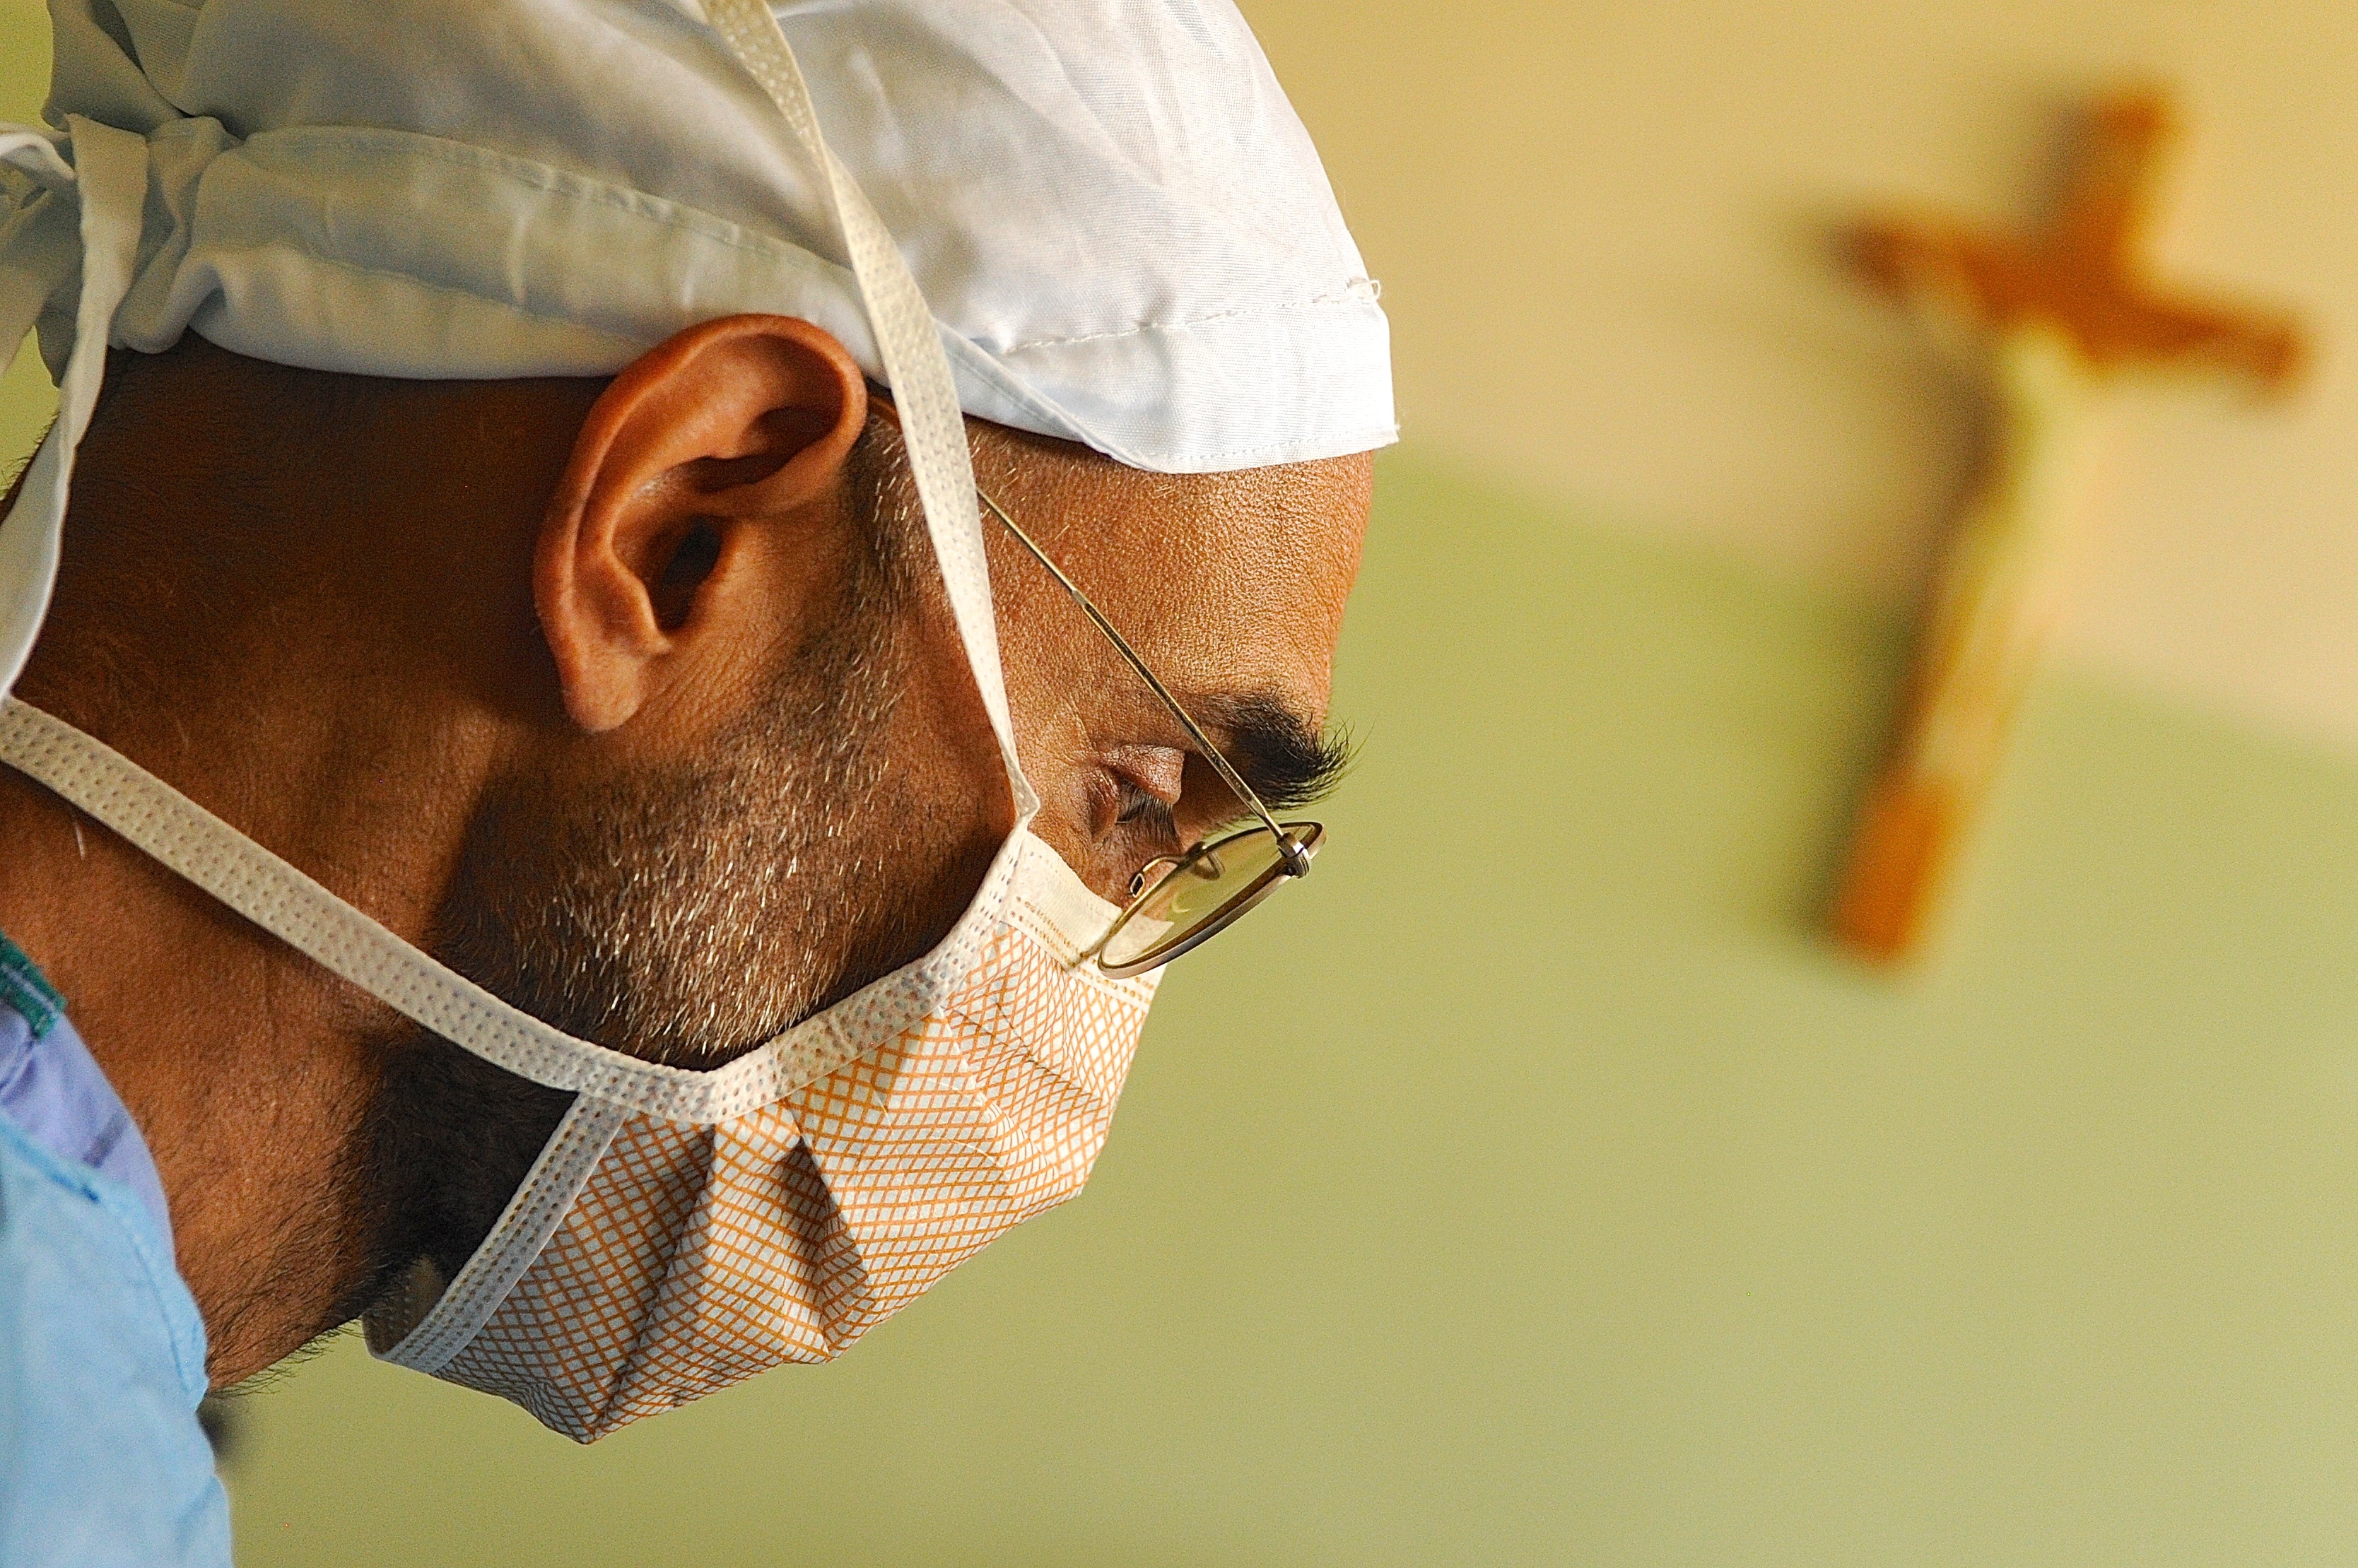 Dr. Tom Catena, the Heart of the Nuba Mountains, in surgical scrubs